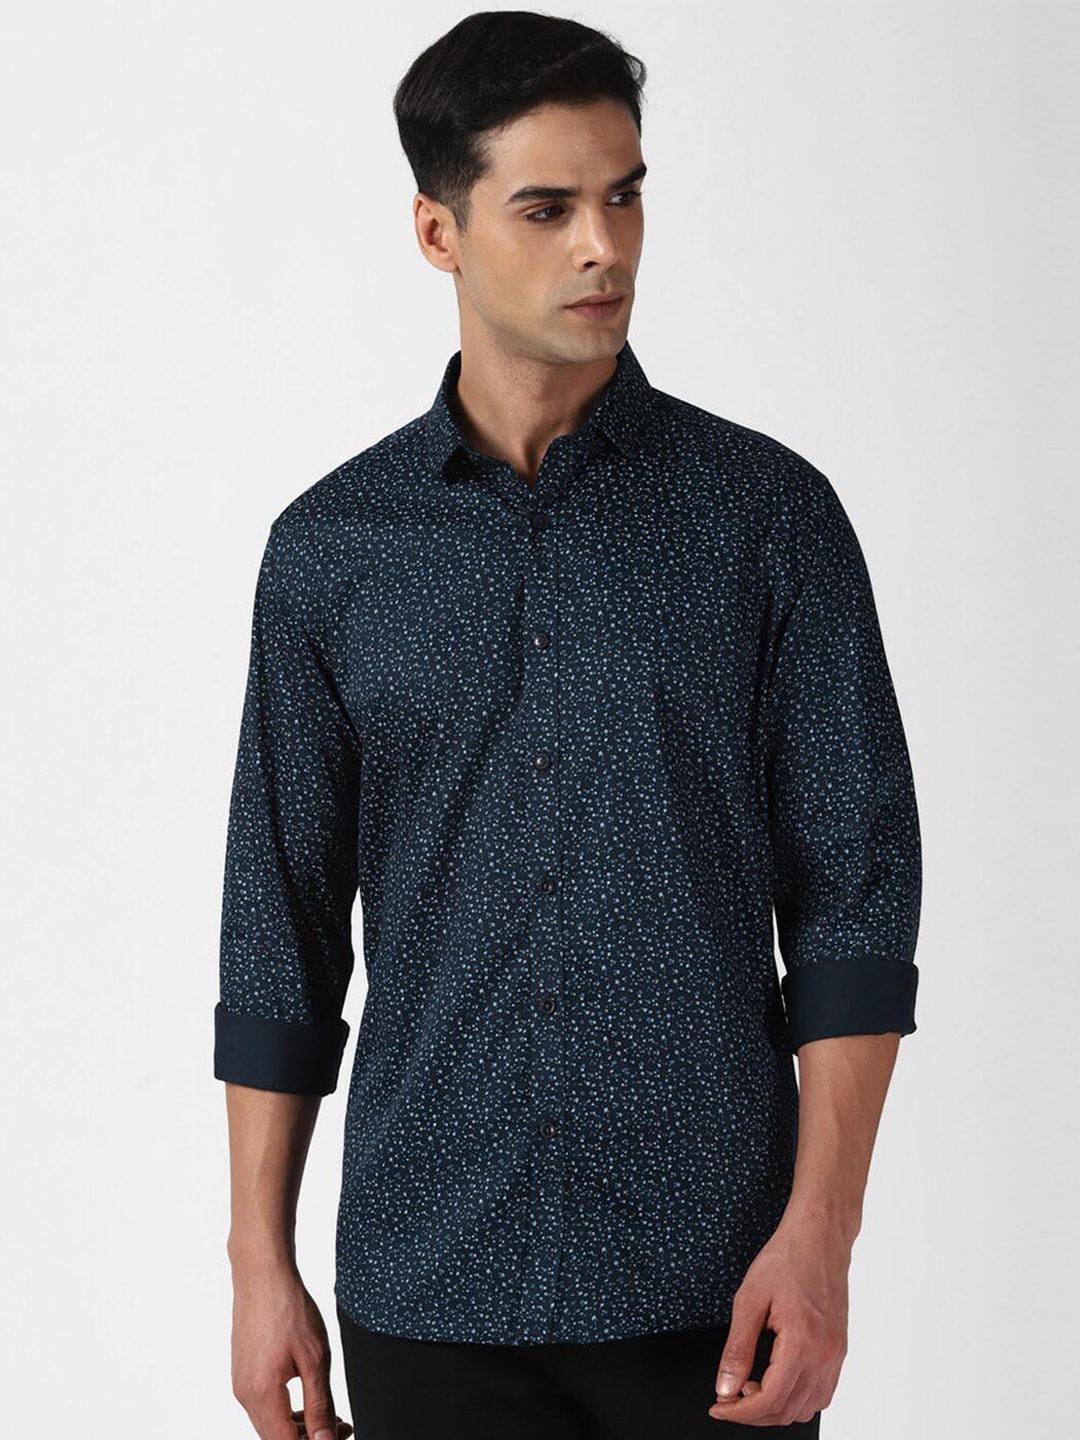 v dot slim fit abstract printed pure cotton casual shirt